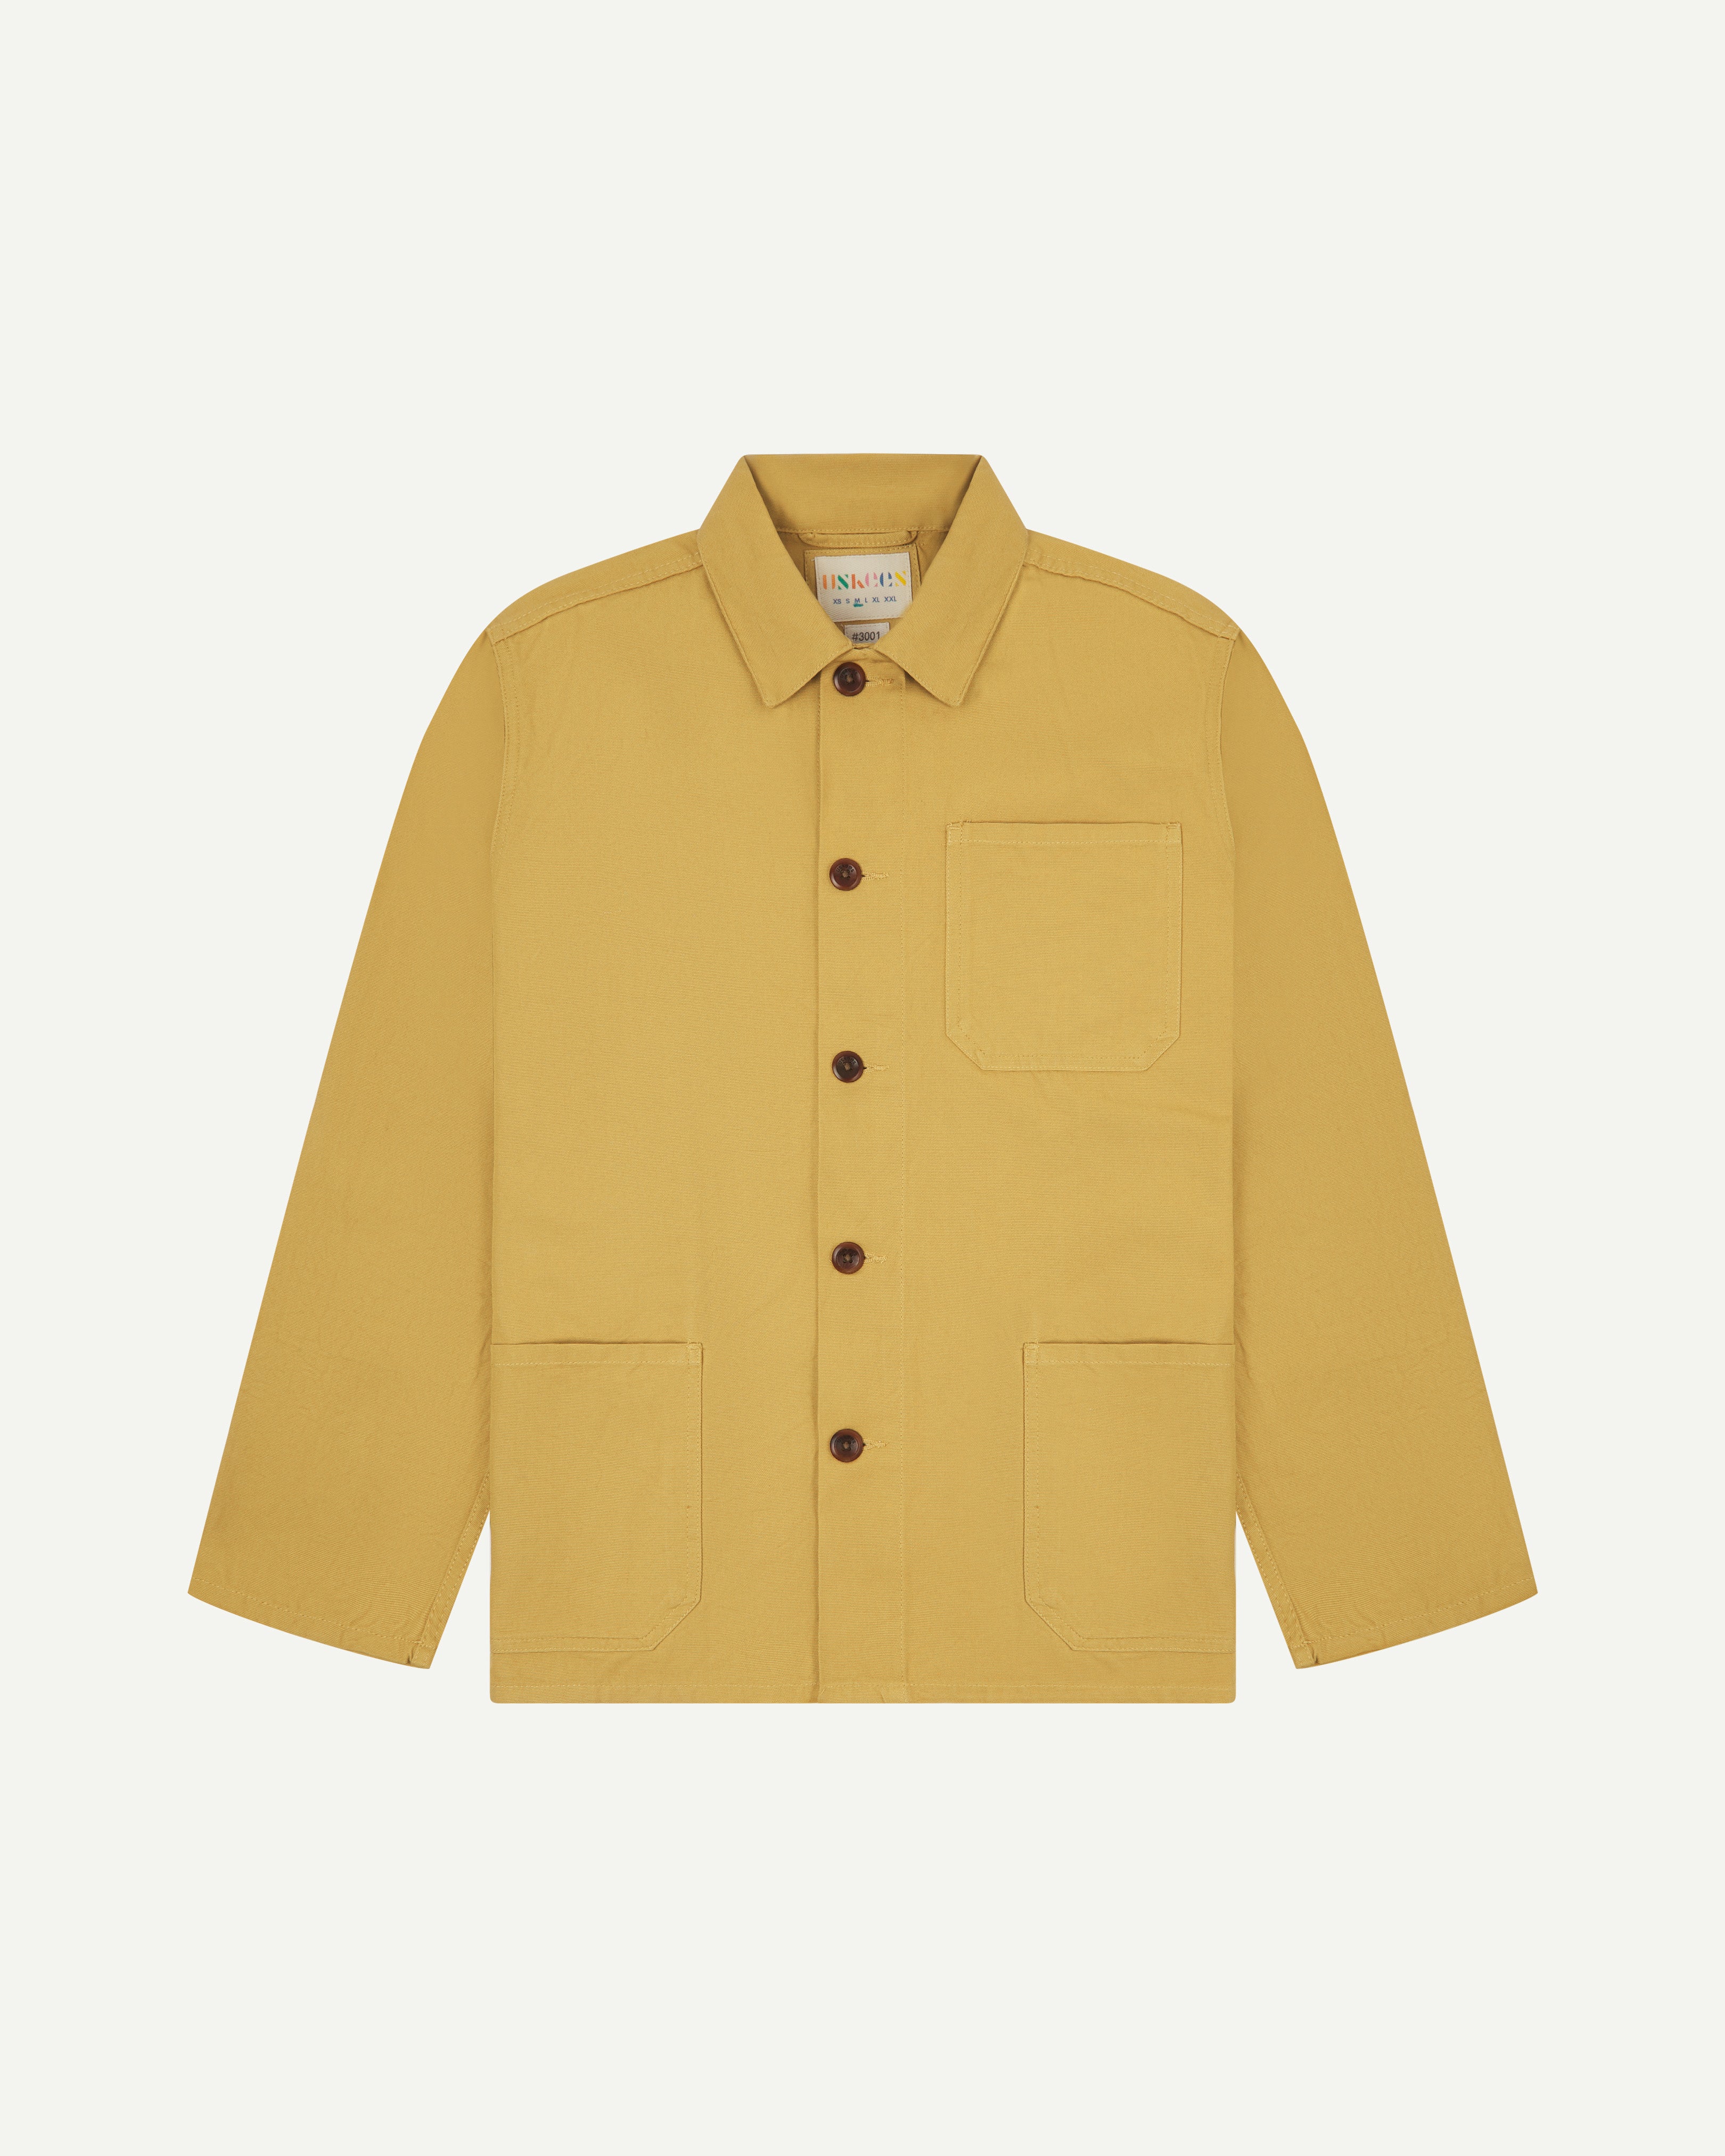 Flat shot of the front of a yellow men's overshirt with buttons done up and showing uskees neck label